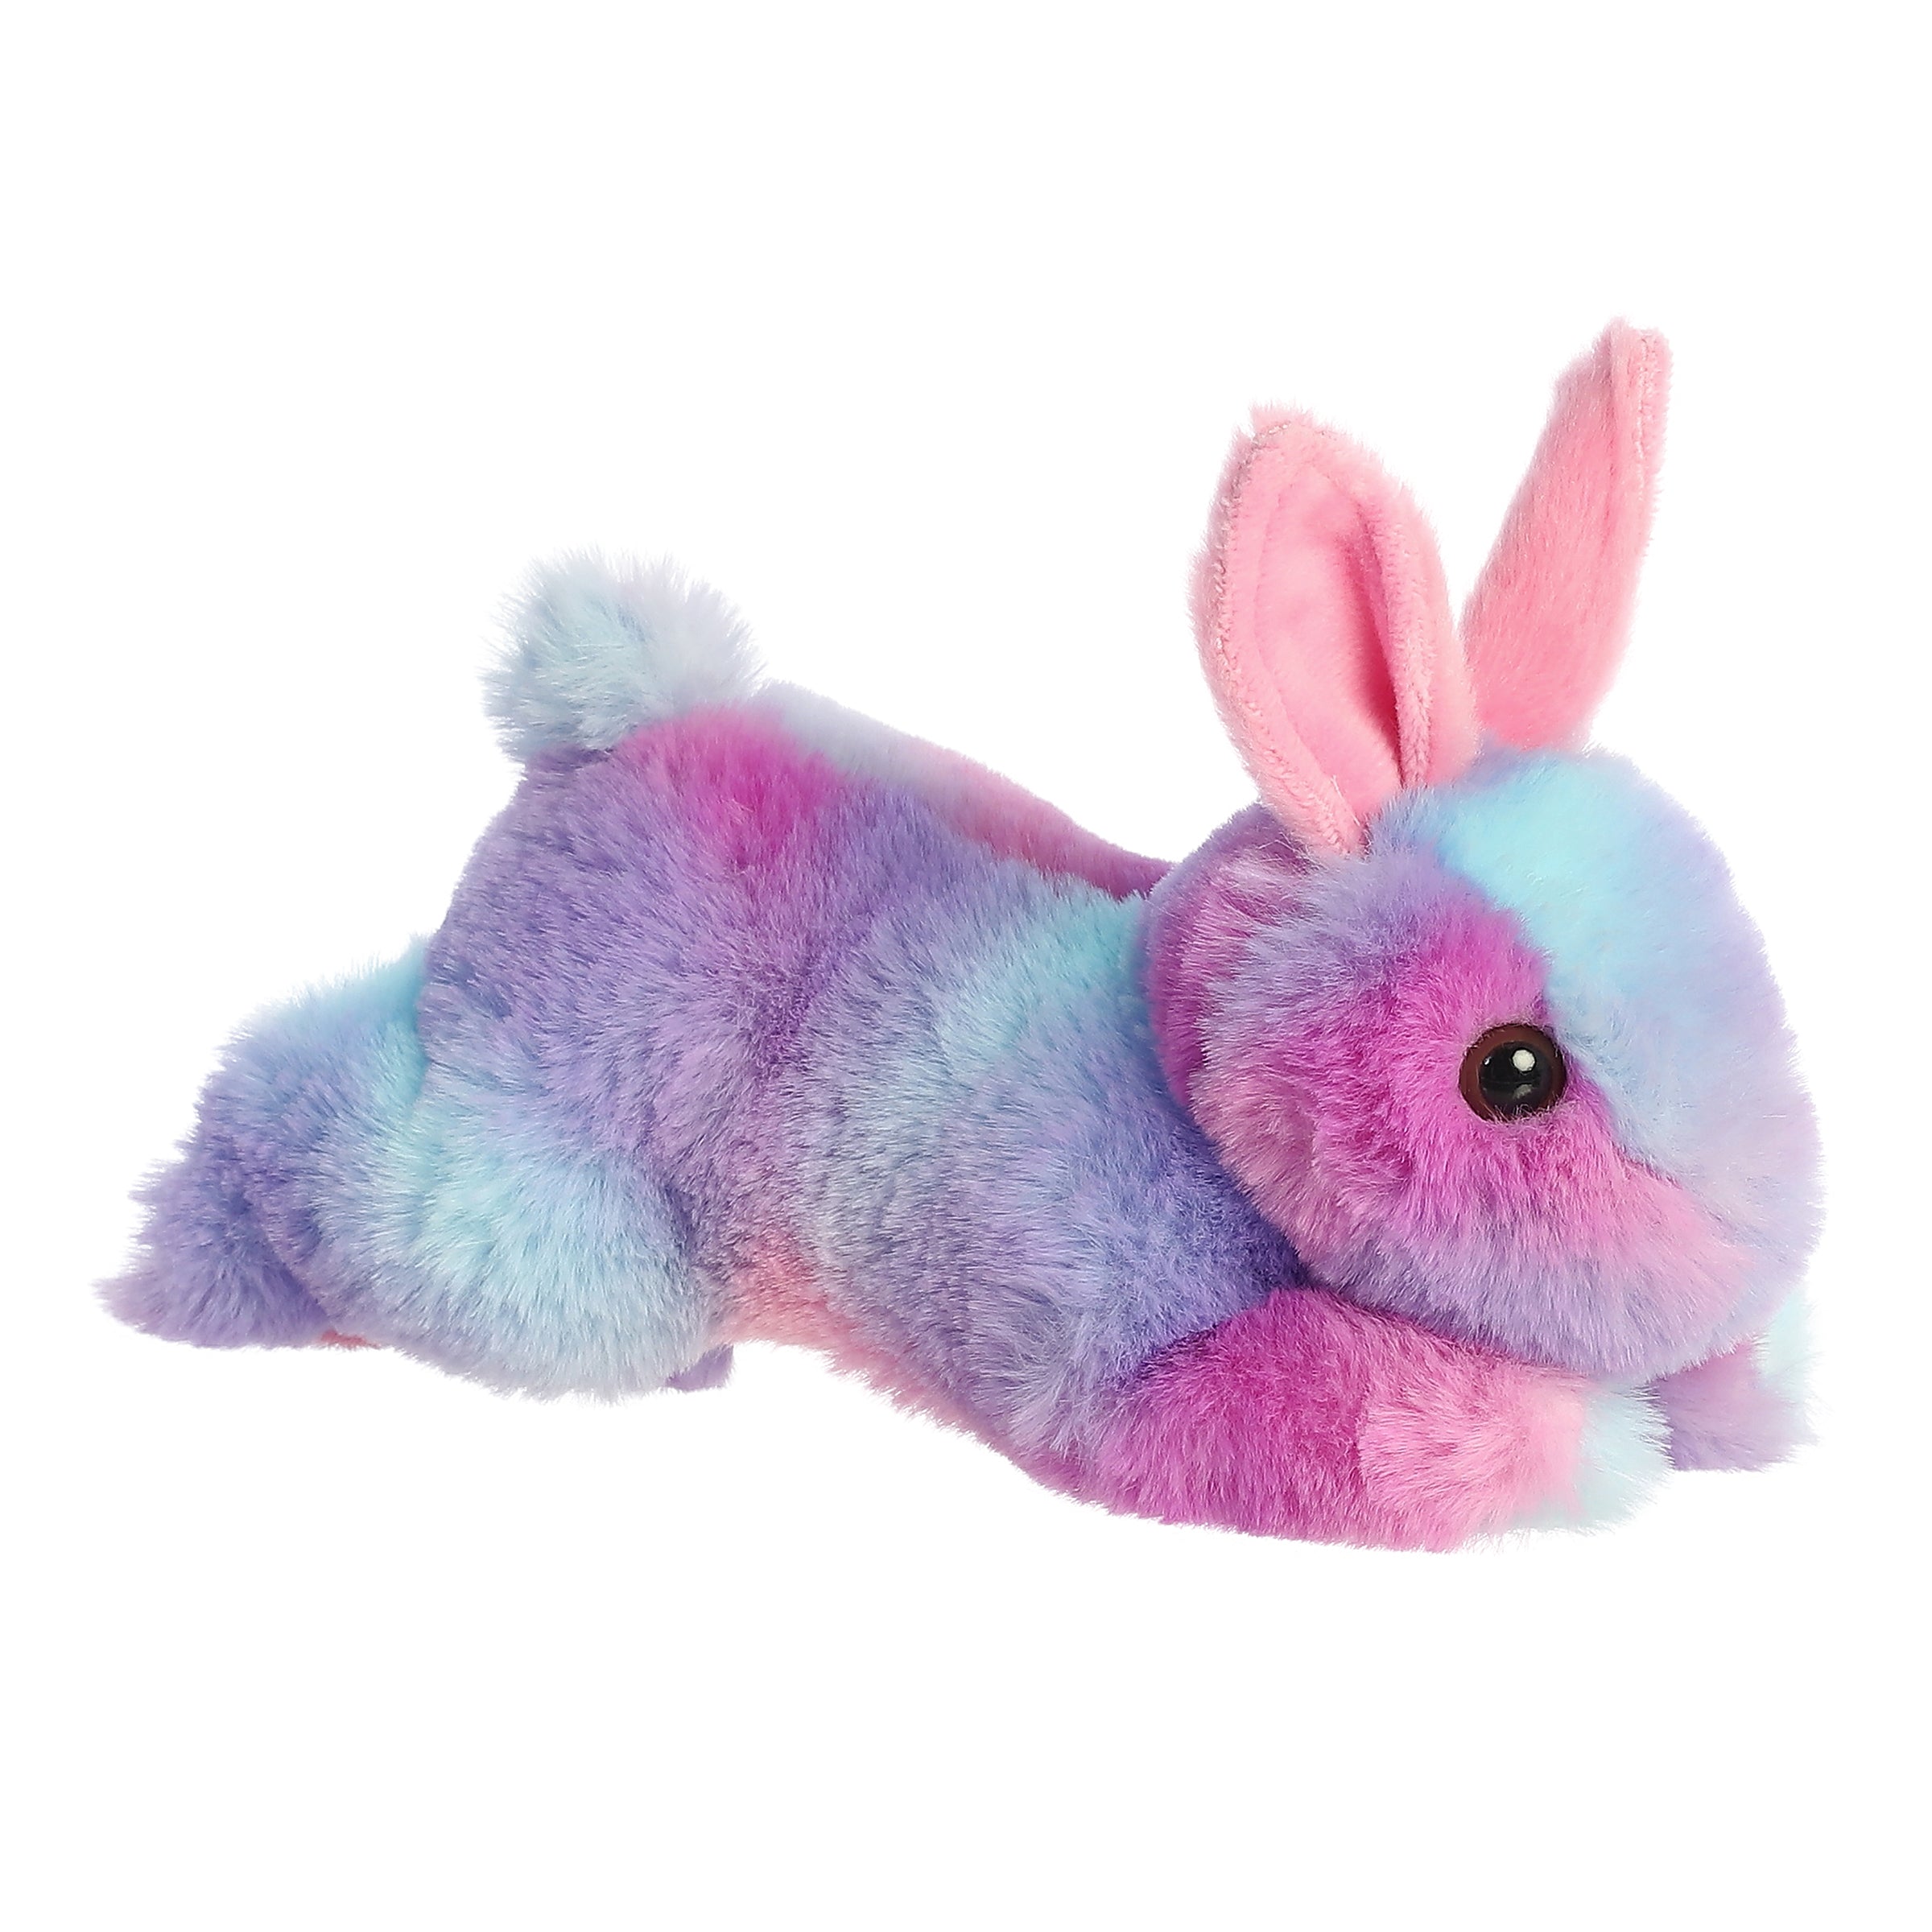 An adorable Mini Flopsie bunny plush that is available in pastel, lavender, or mint!